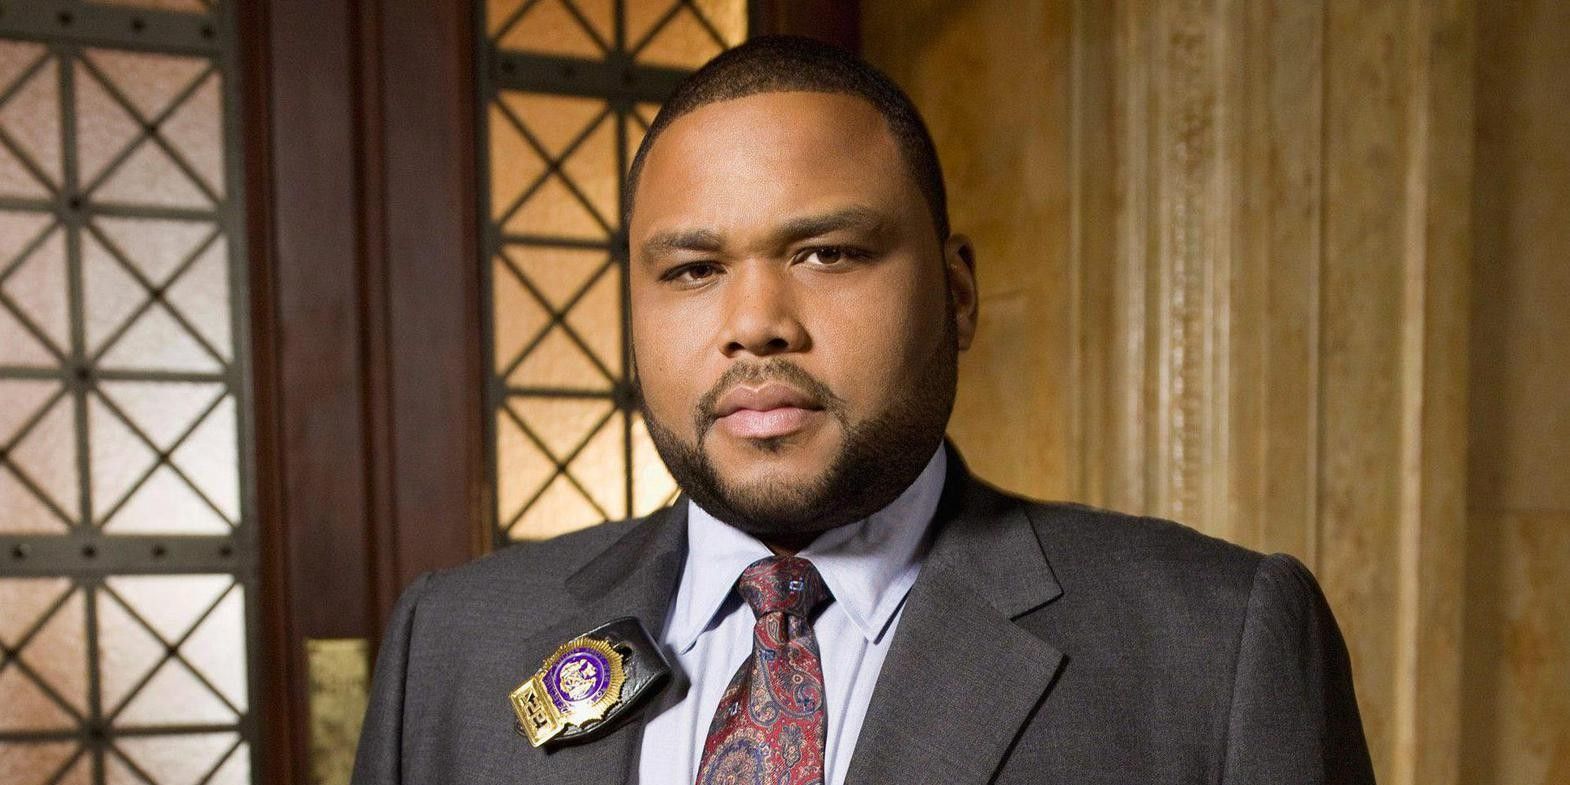 Anthony Anderson Law and Order Kevin Bernard